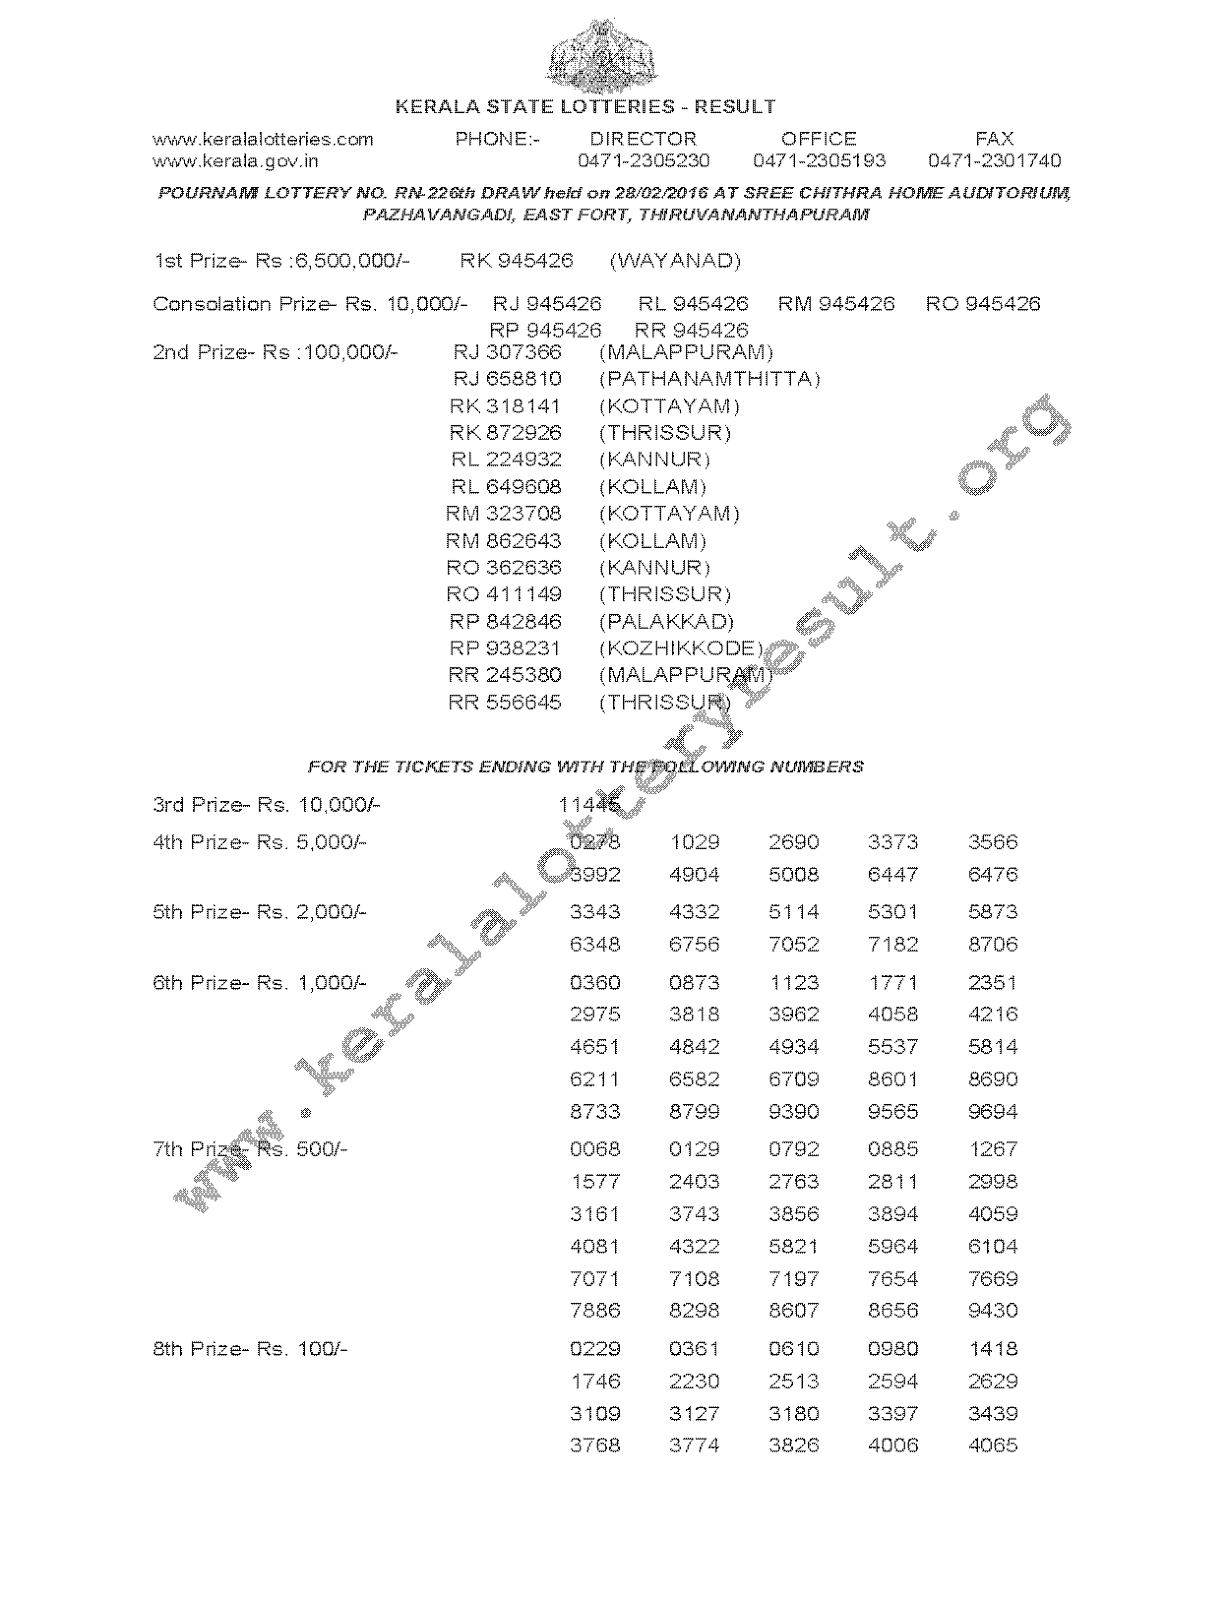 POURNAMI Lottery RN 226 Result 28-02-2016